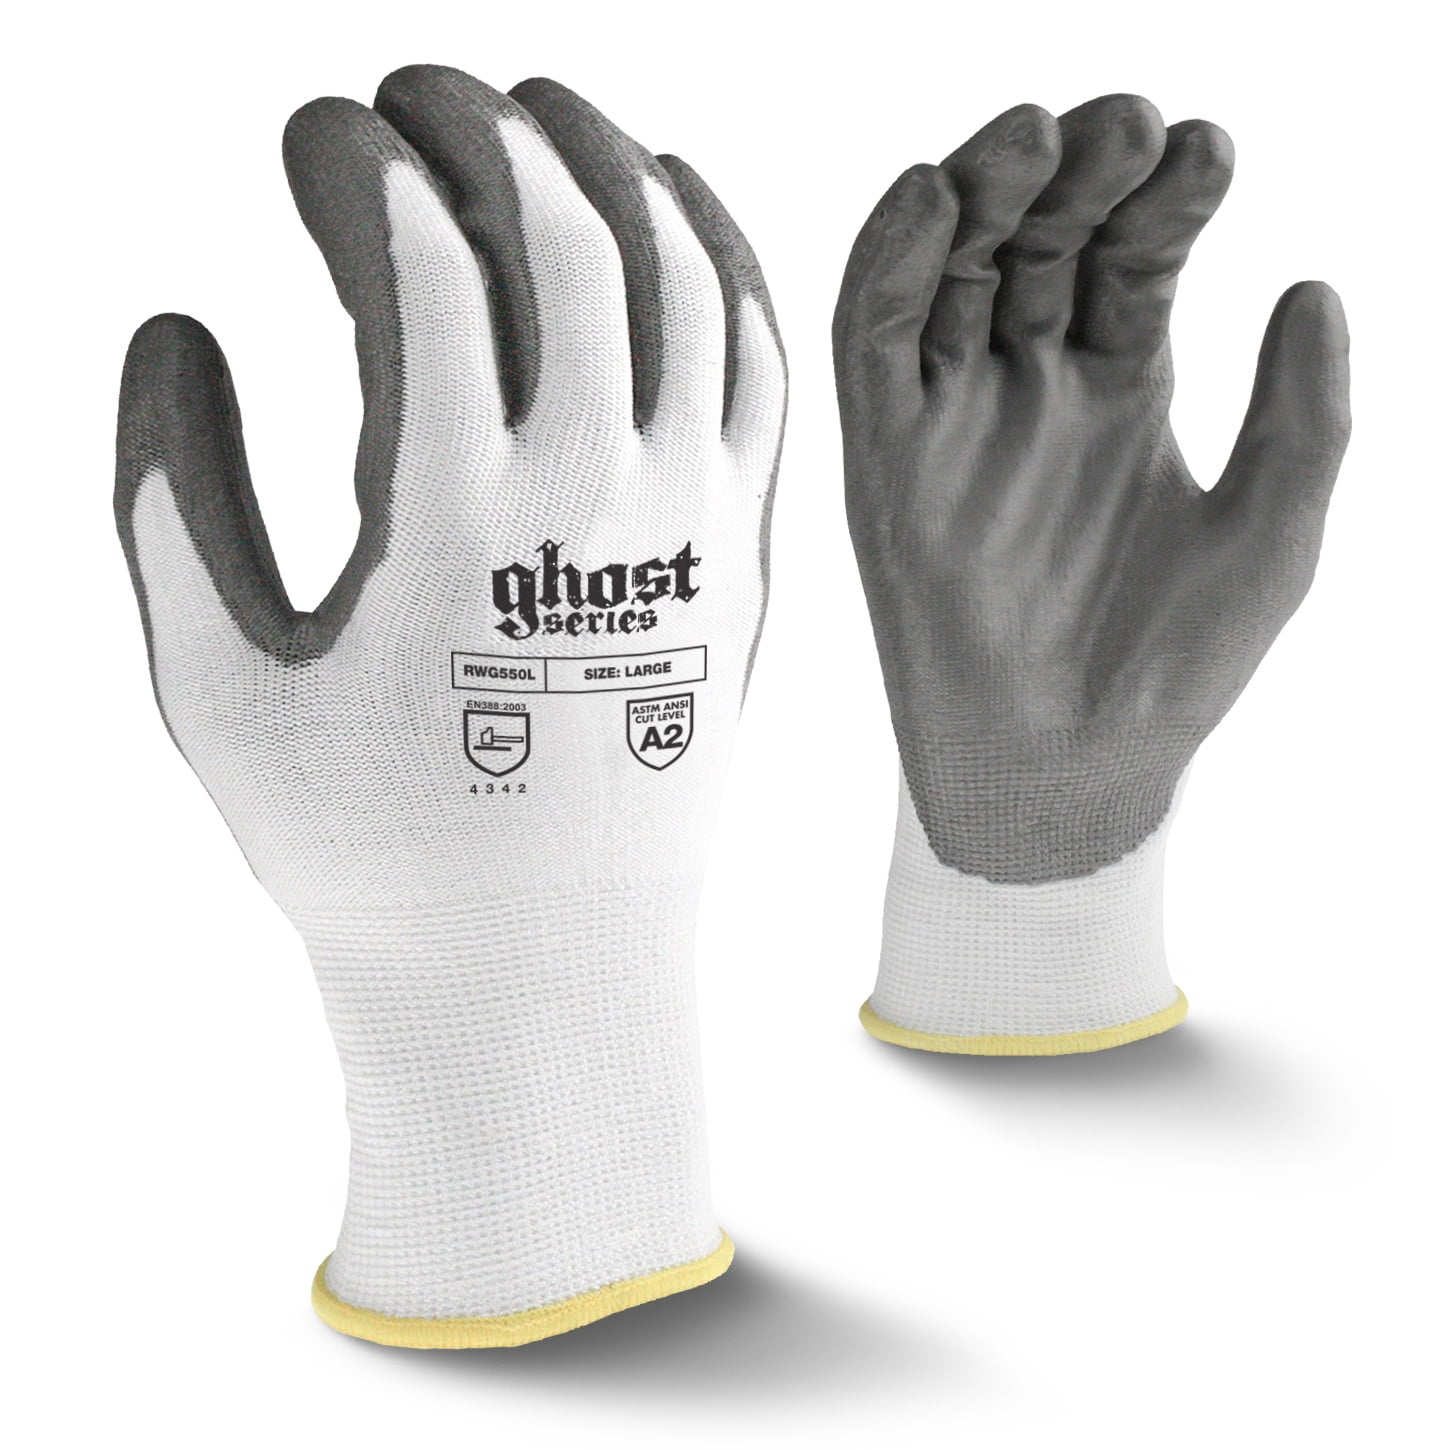 12 per Pack Radians RWG550M Ghost Series Cut Protection Level 3 Work Glove Medium 